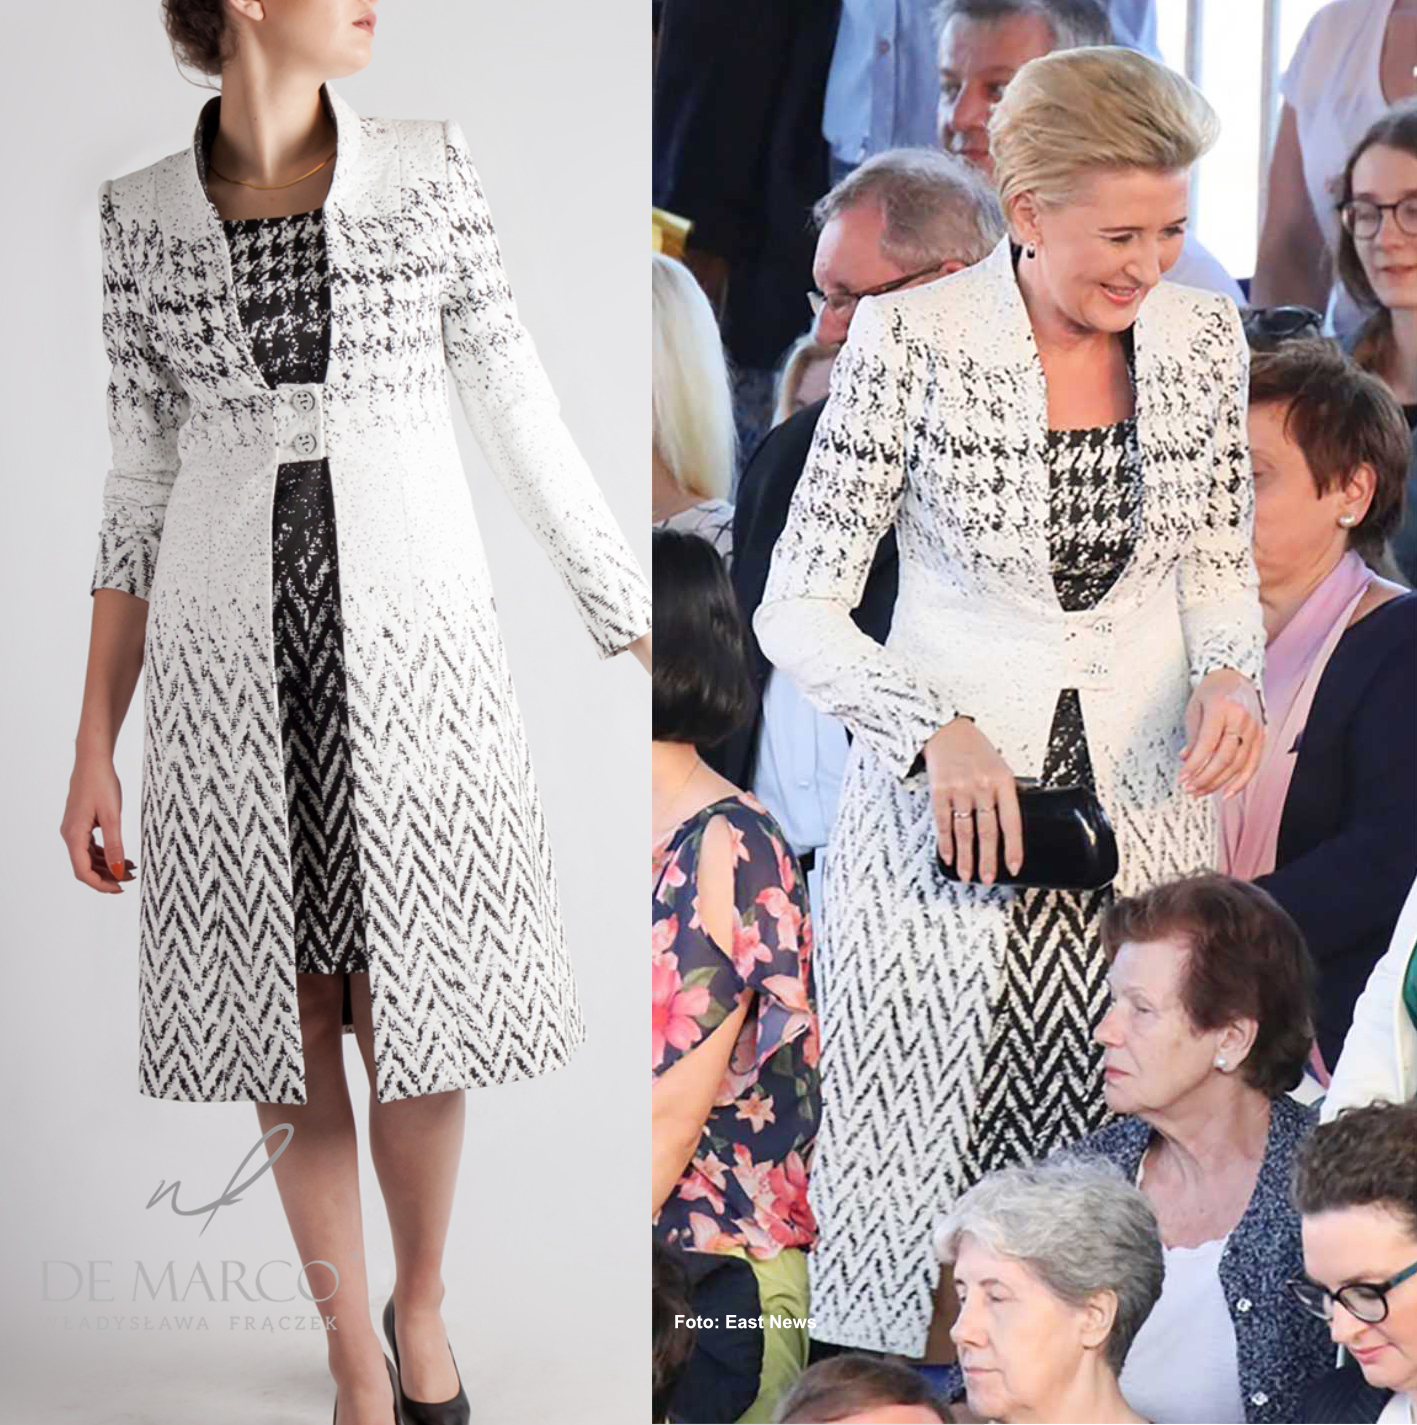 The most fashionable formal creations. The First Lady in an ensemble from De Marco.